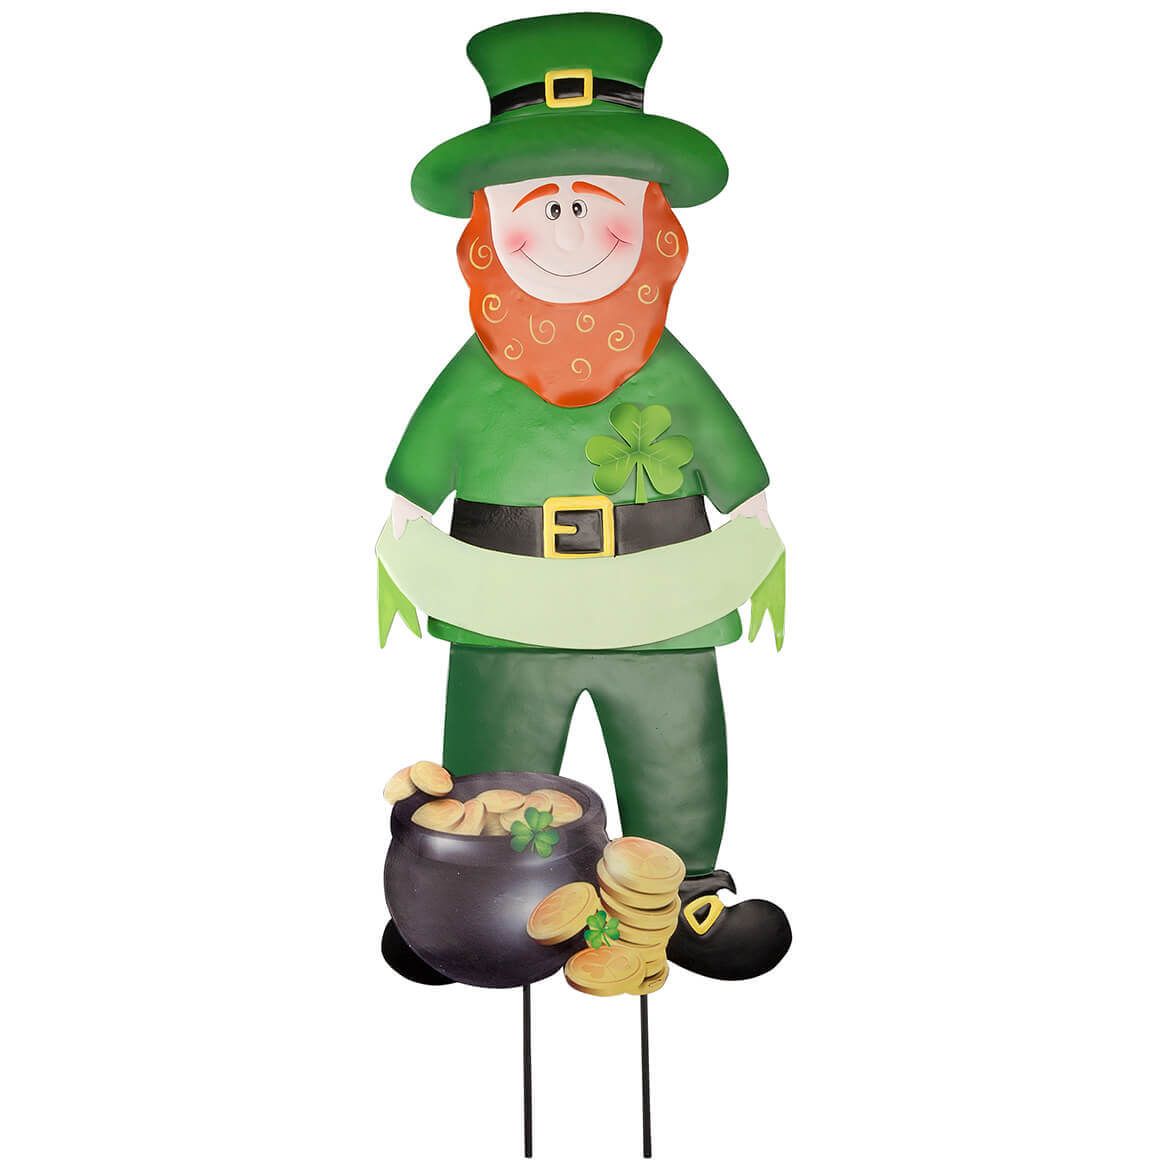 Personalized Leprechaun Lawn Stake by Fox River™ Creations + '-' + 353627